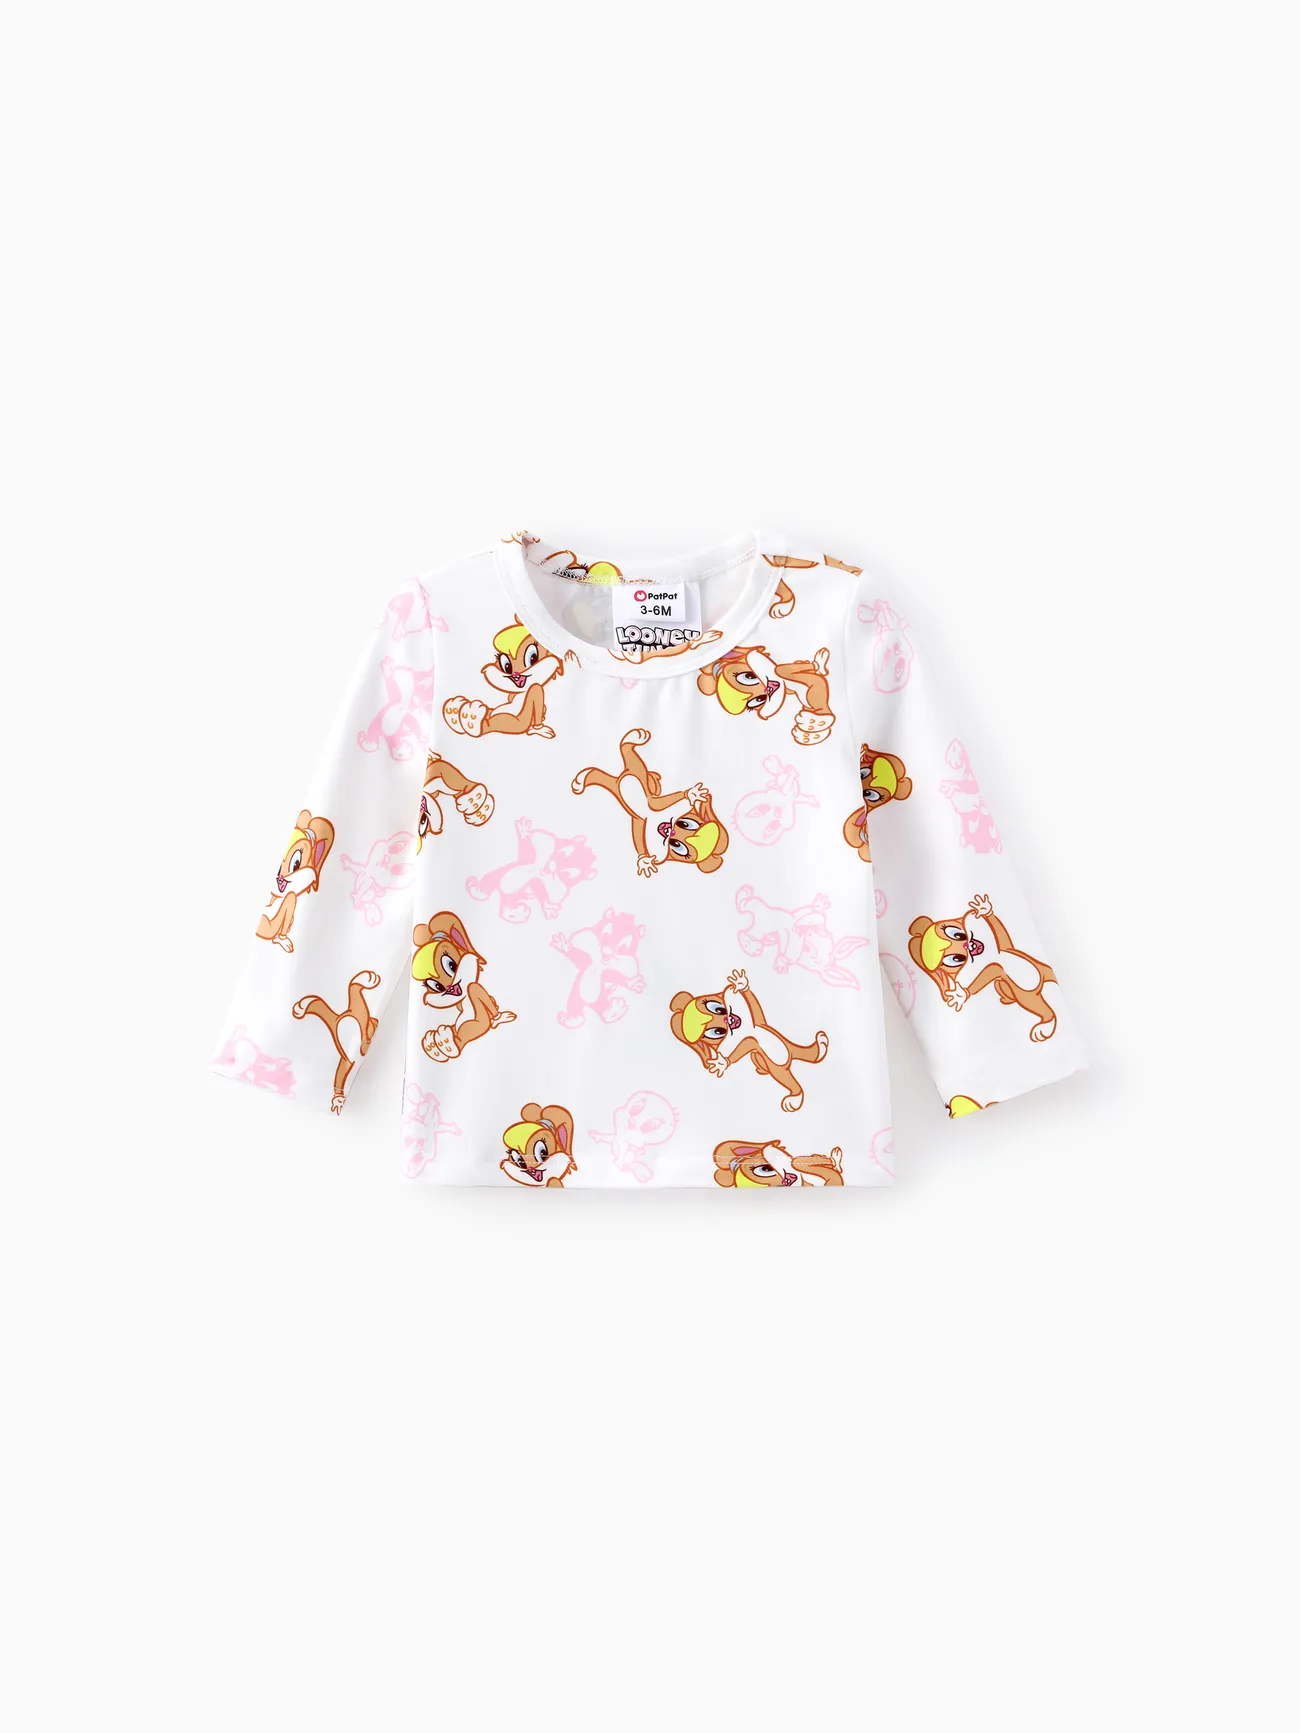 Looney Tunes Baby Boy/Girl Character Graphic Print Top or Jumpsuit Pink big image 1